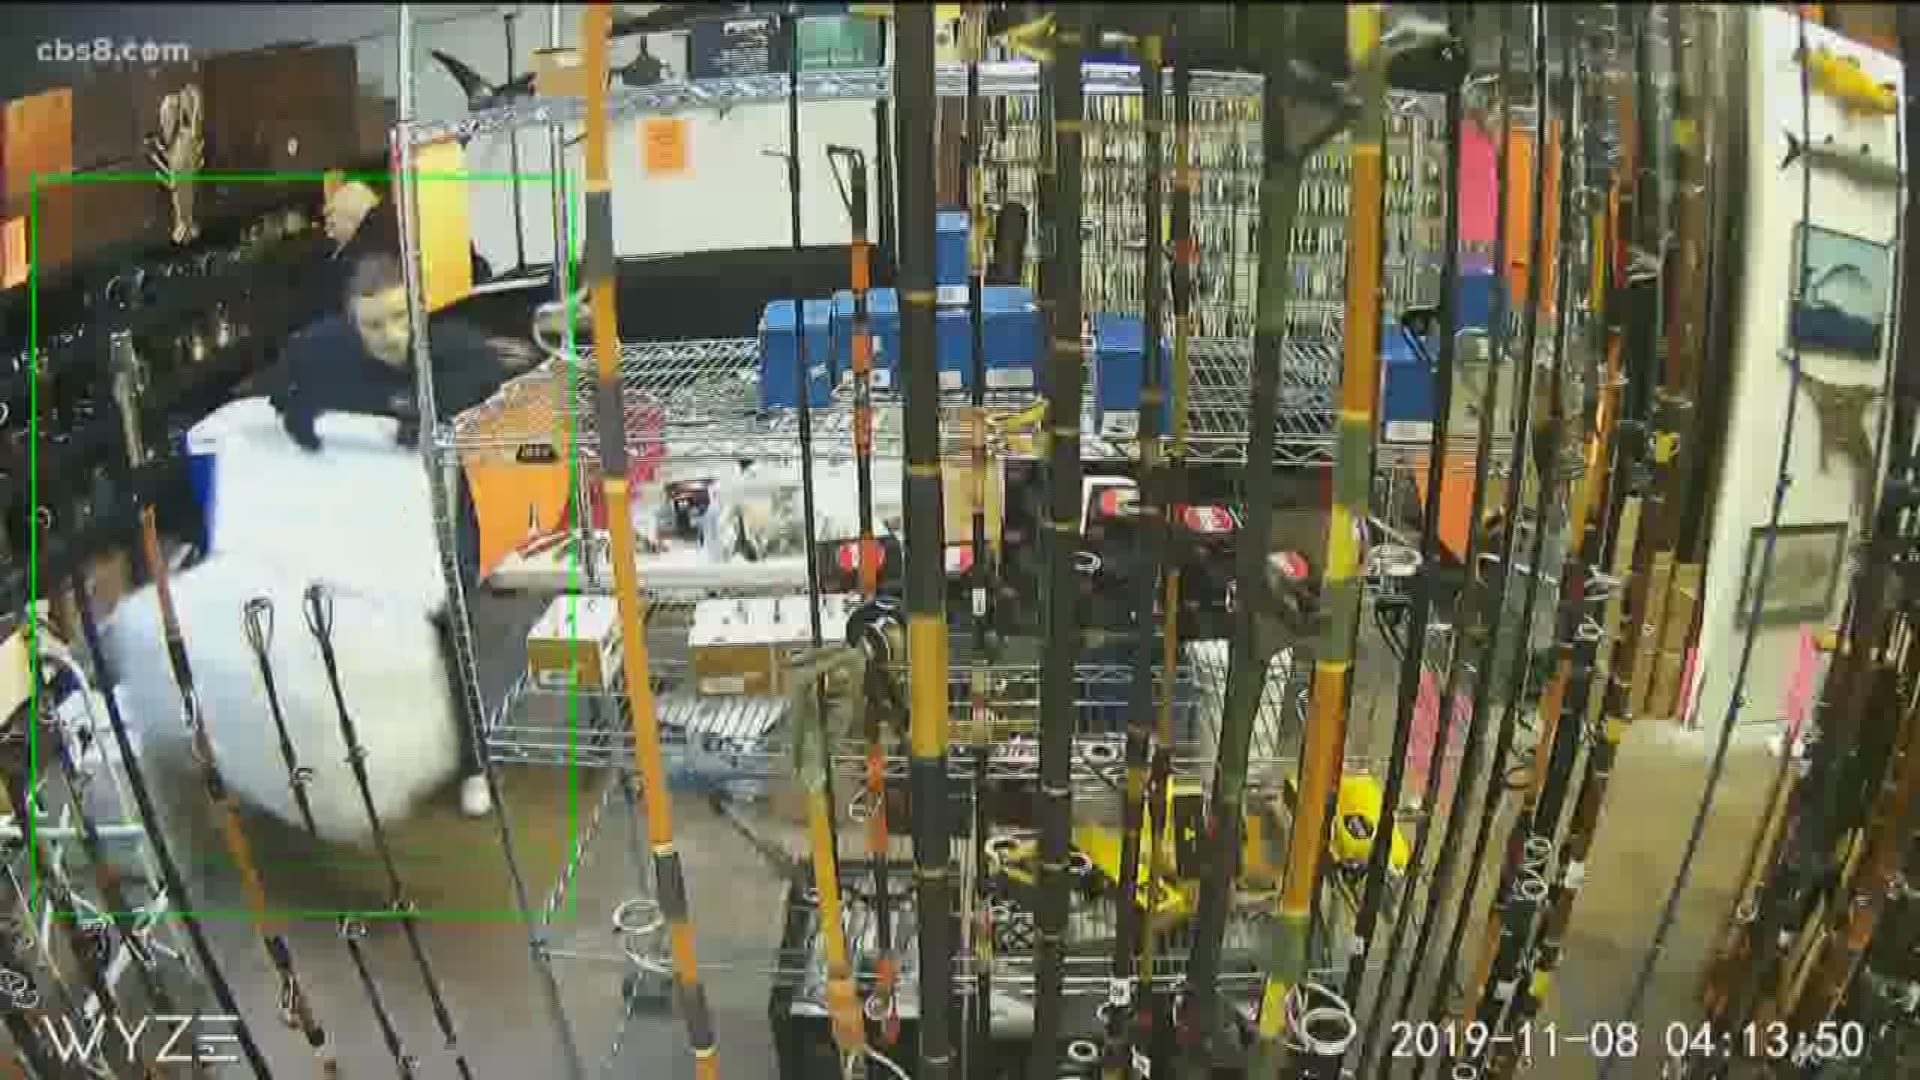 This is the second time the family's shop has been targeted in recent months. In the first break-in the shop lost almost $100,000 in merchandise.